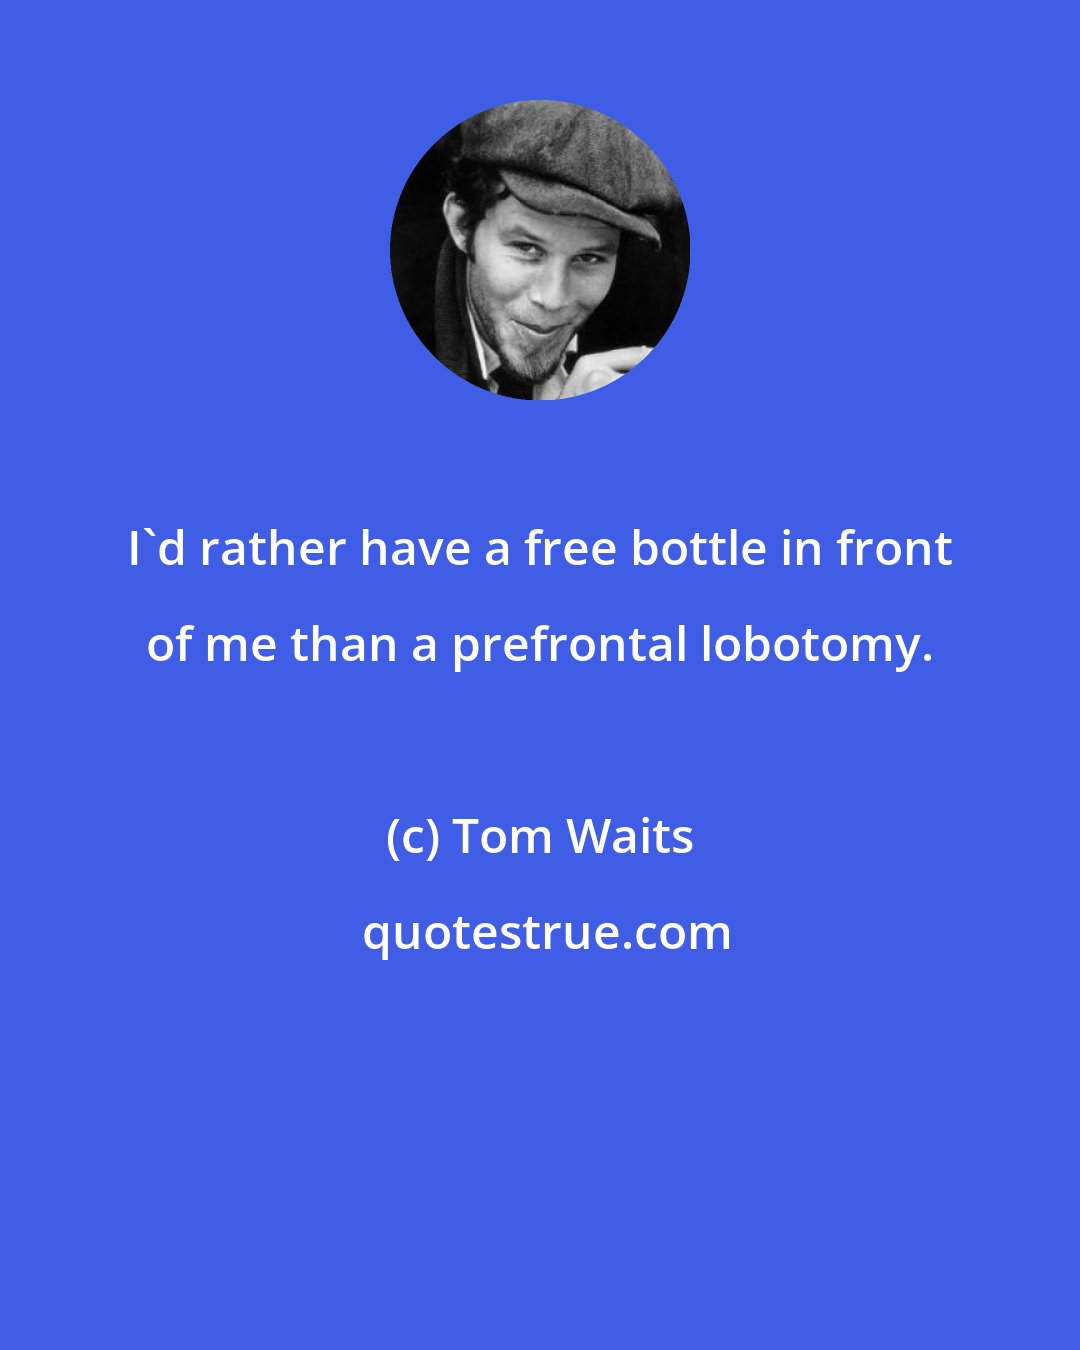 Tom Waits: I'd rather have a free bottle in front of me than a prefrontal lobotomy.